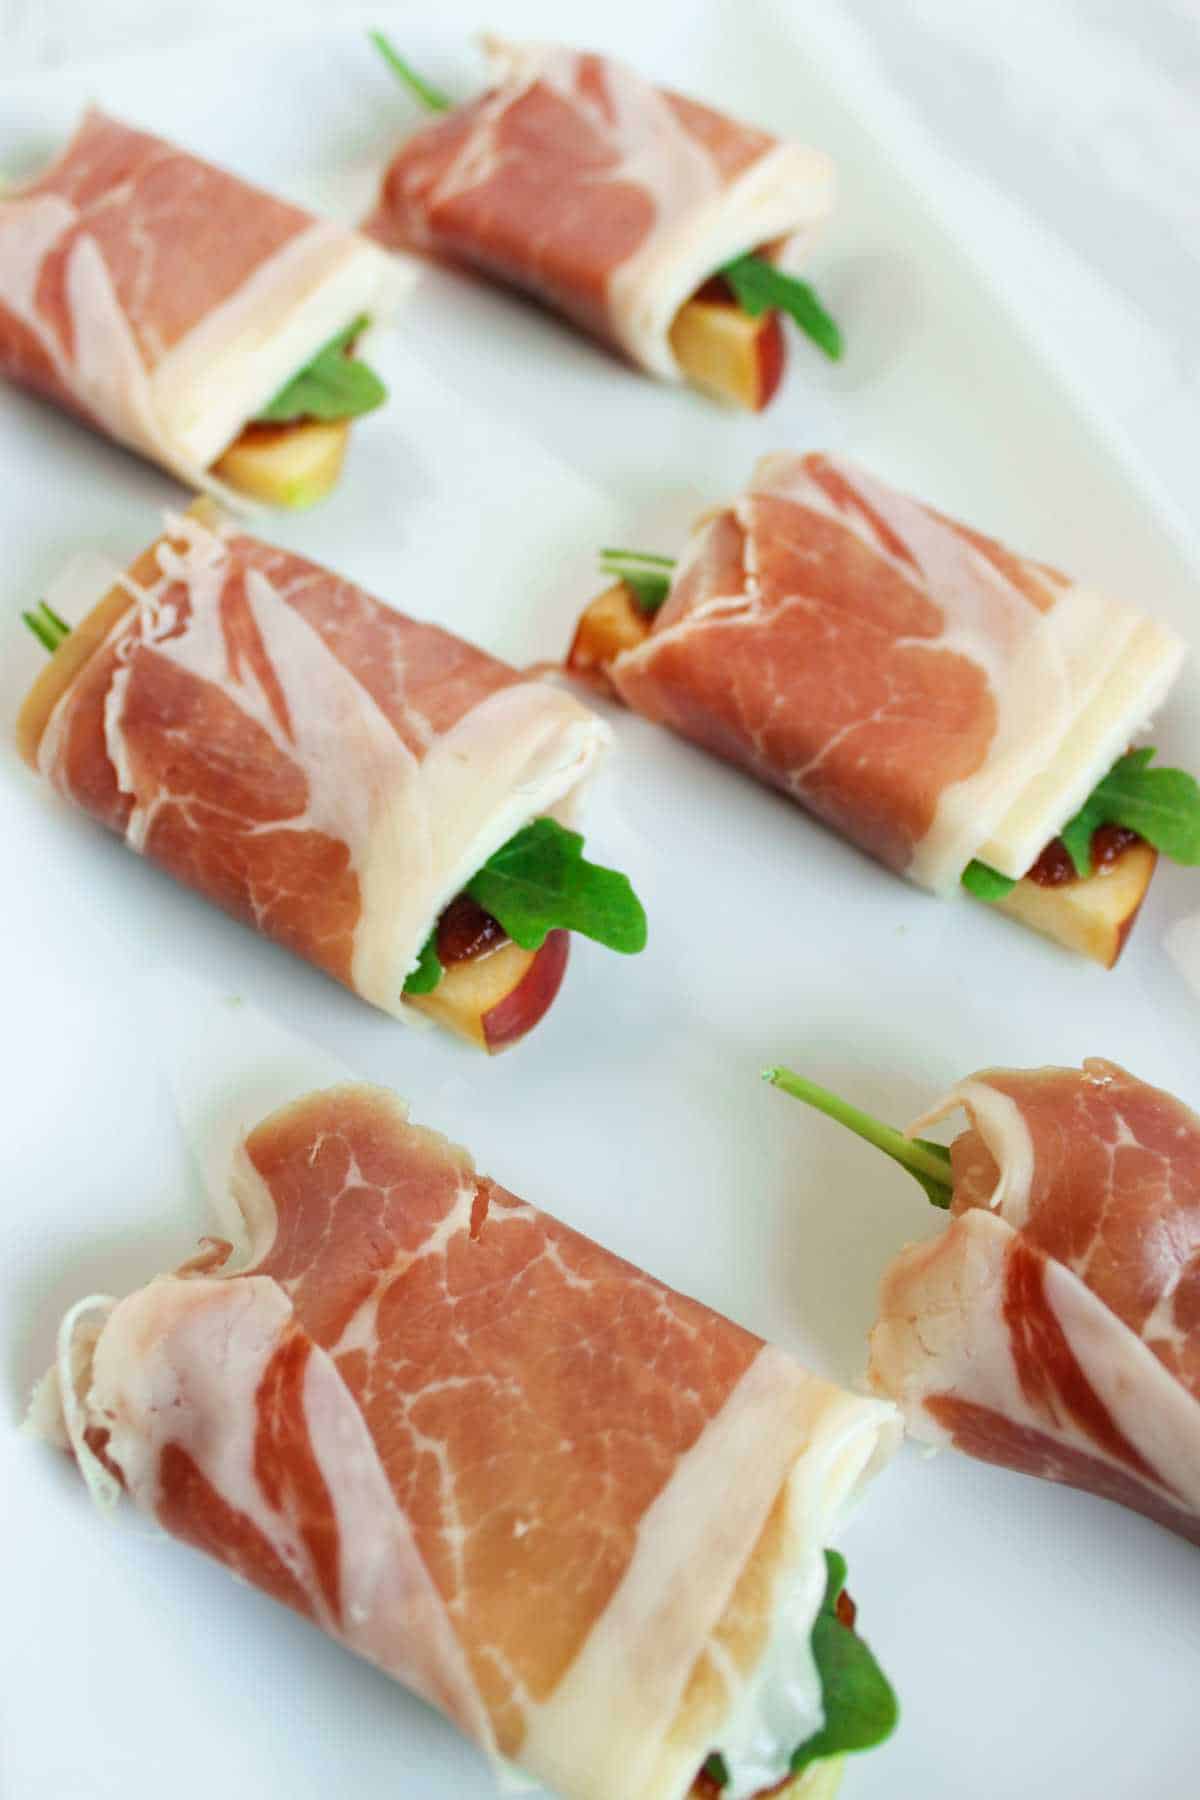 snack bundles of cured meat and cheese.